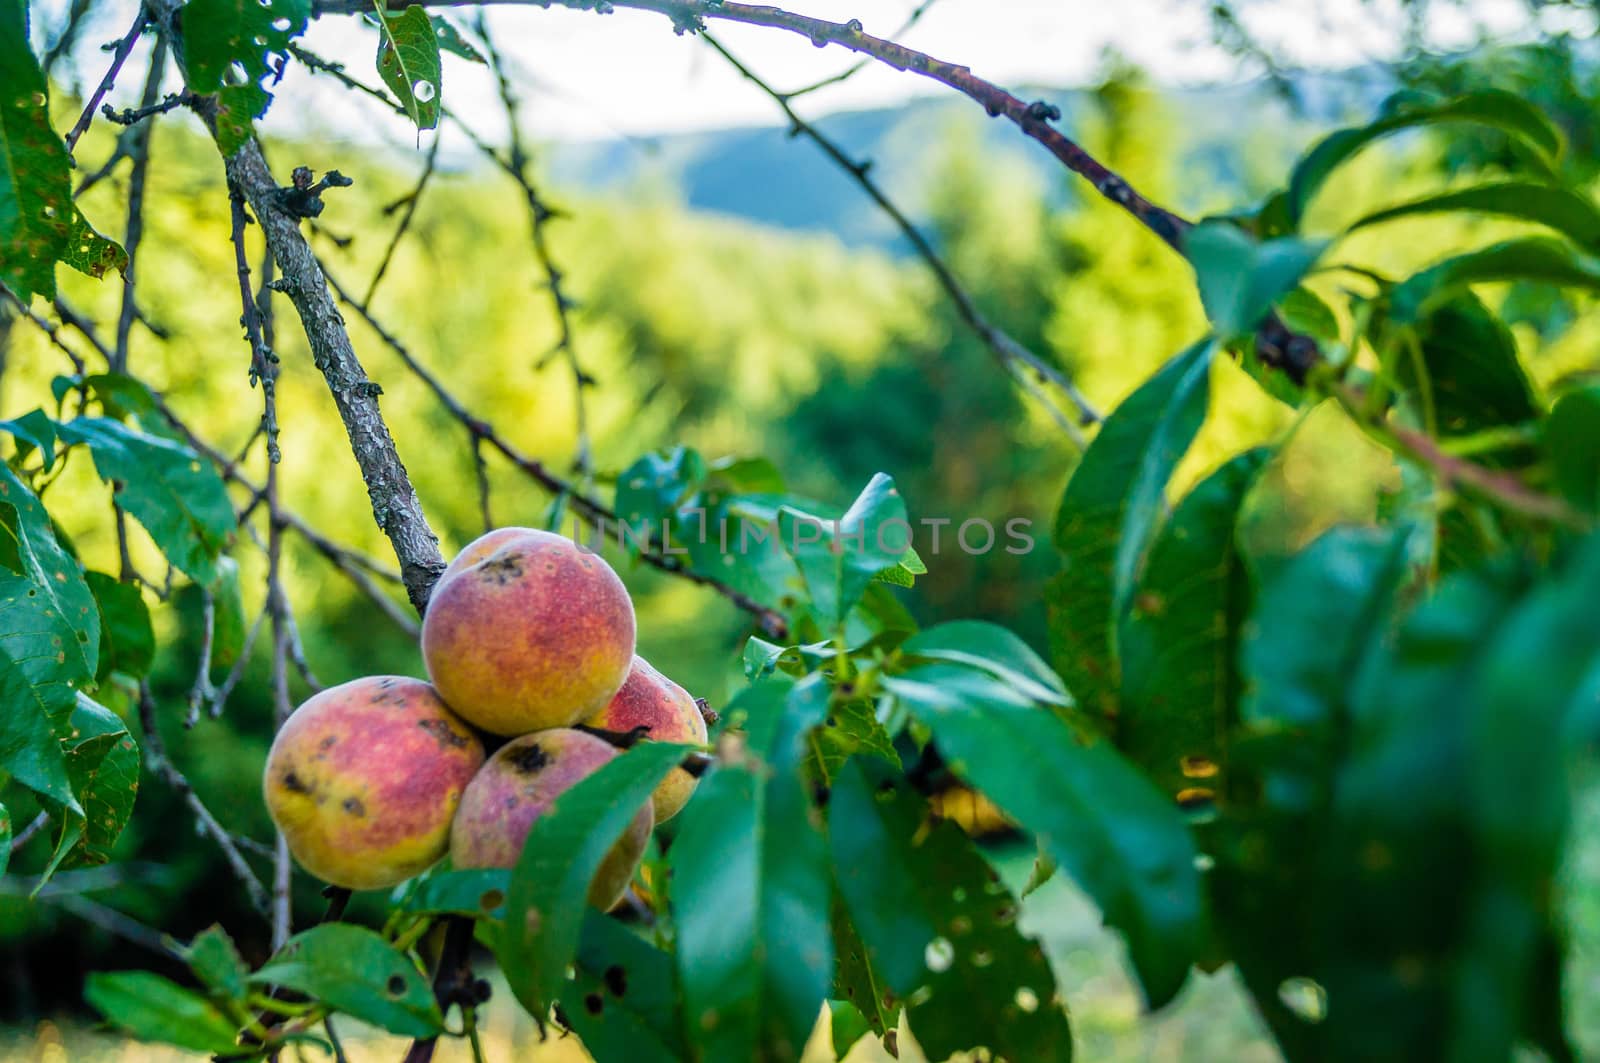 Wild peaches in France in the summer